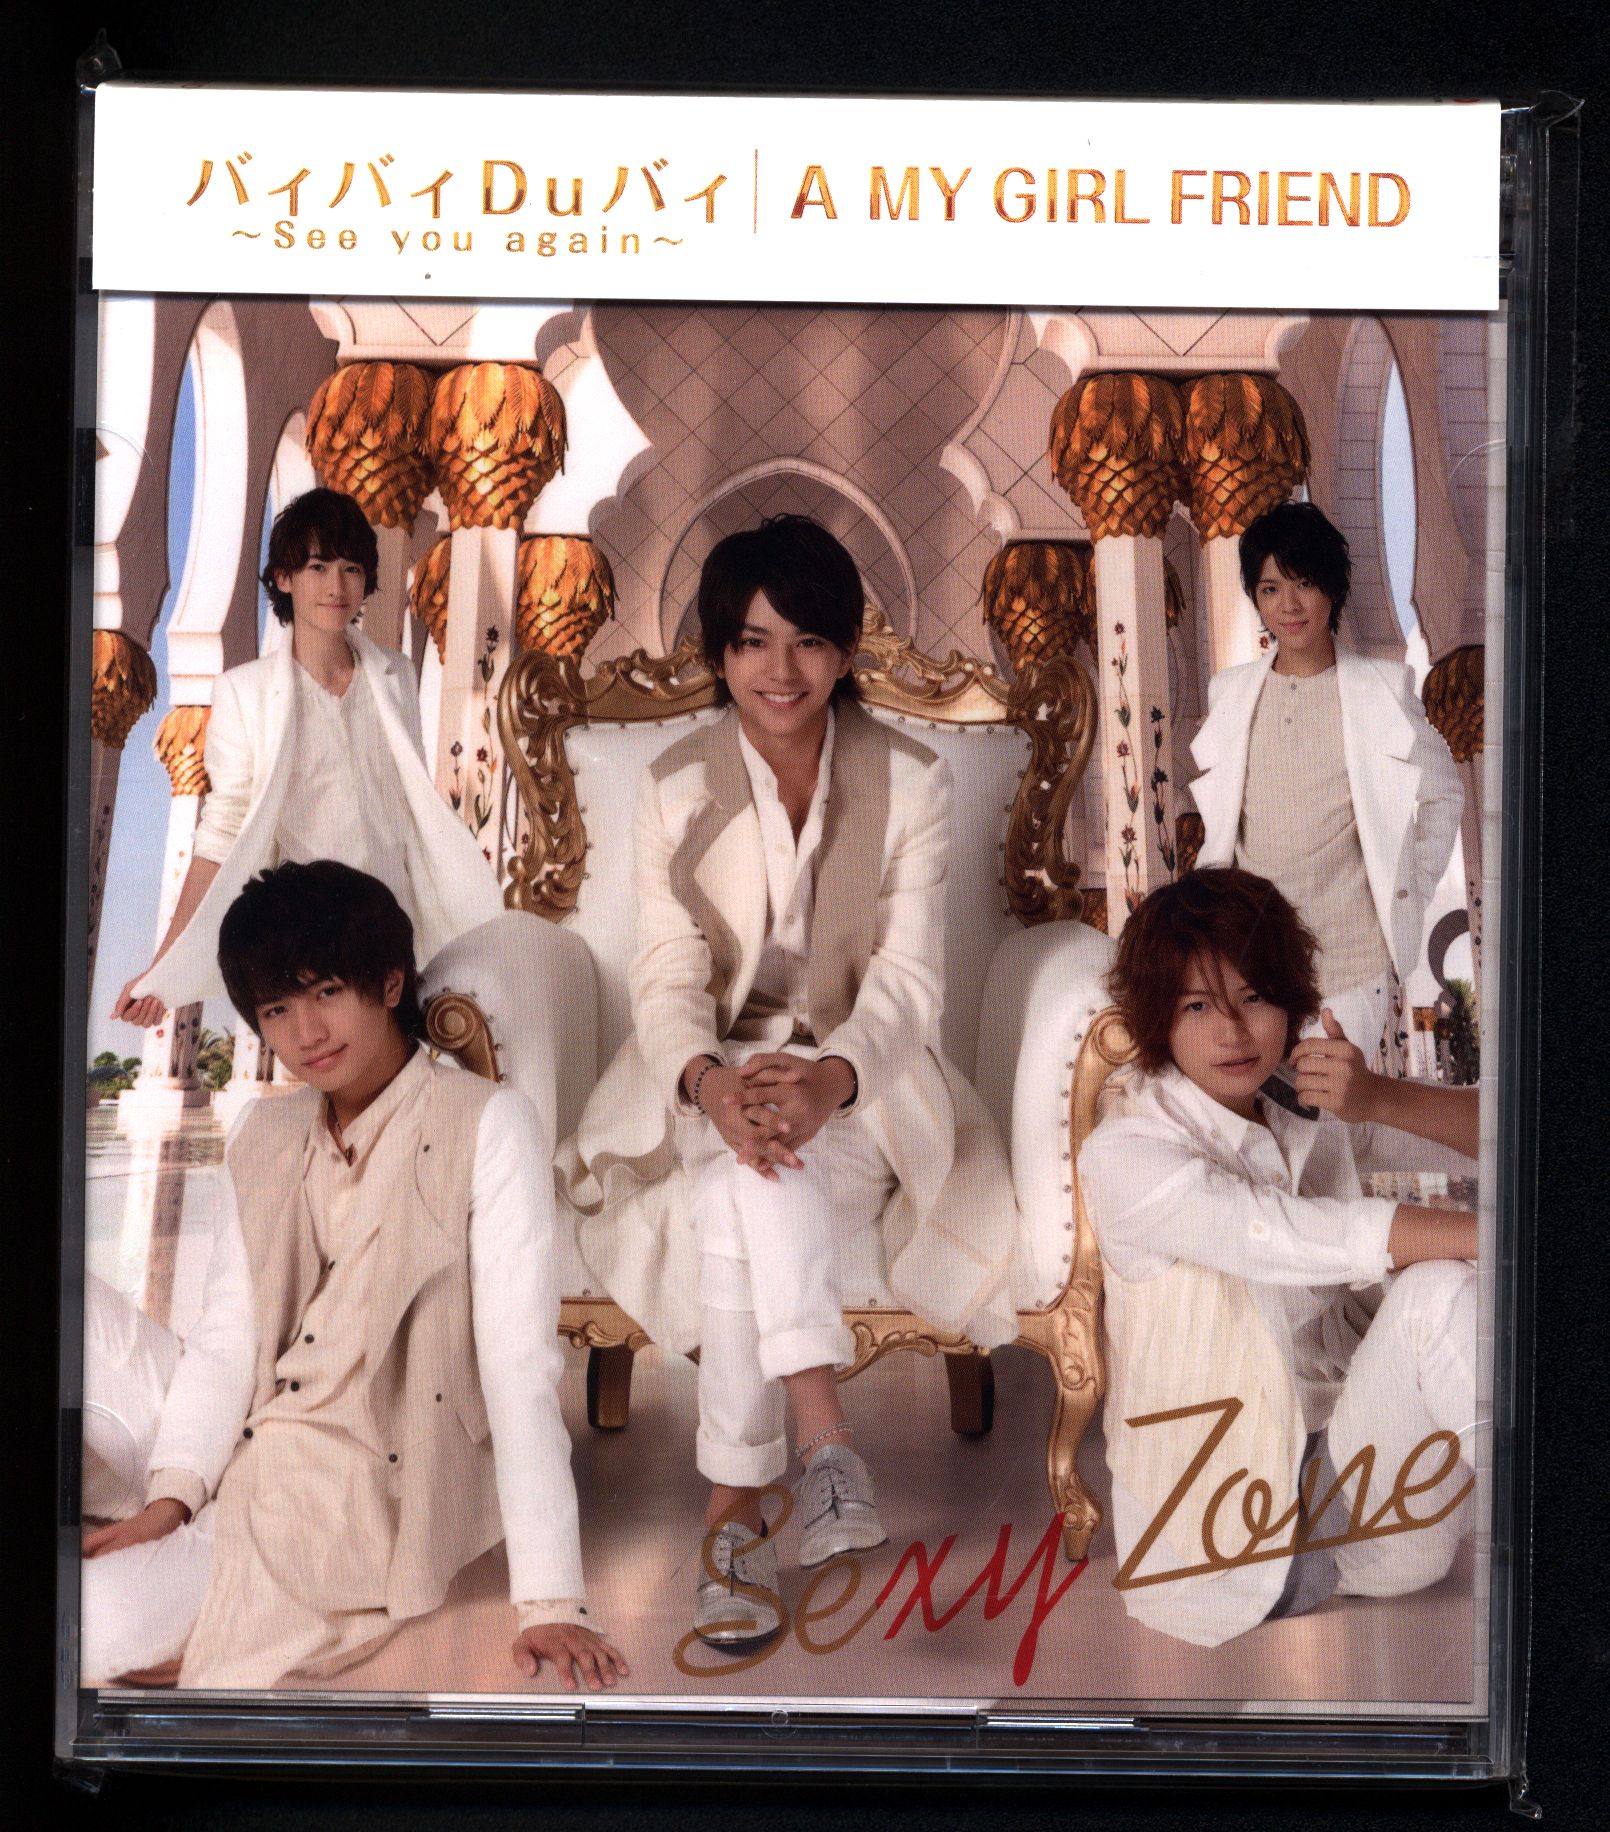 Sexy Zone 中島健人 バィバィDuバィ See you again/A MY GIRL FRIEND